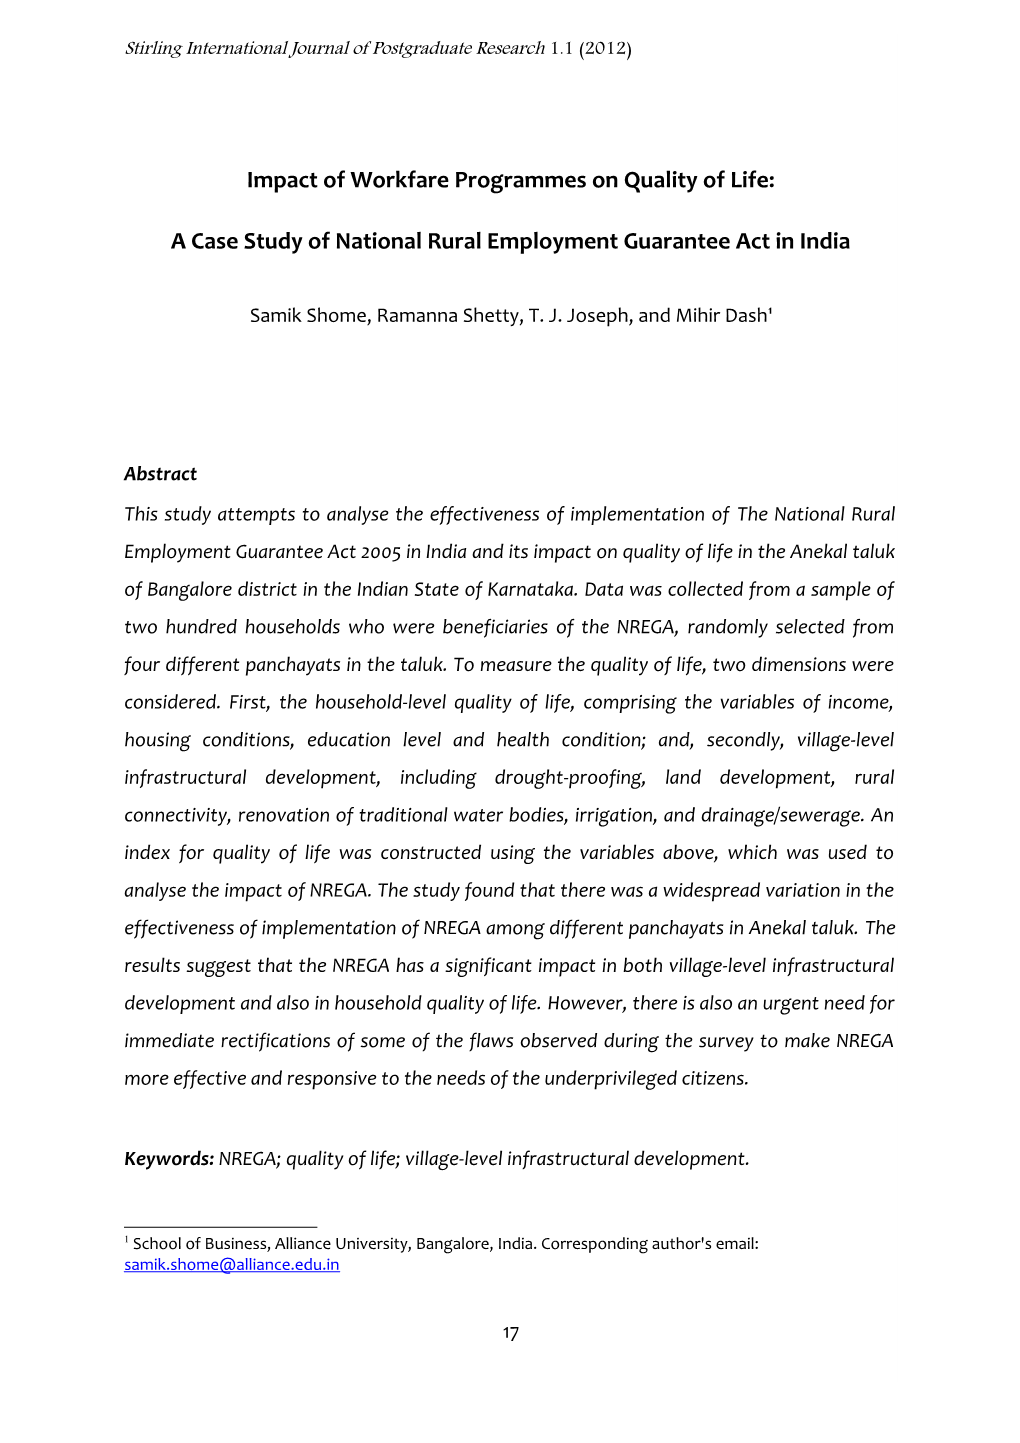 Impact of Workfare Programmes on Quality of Life: a Case Study Of